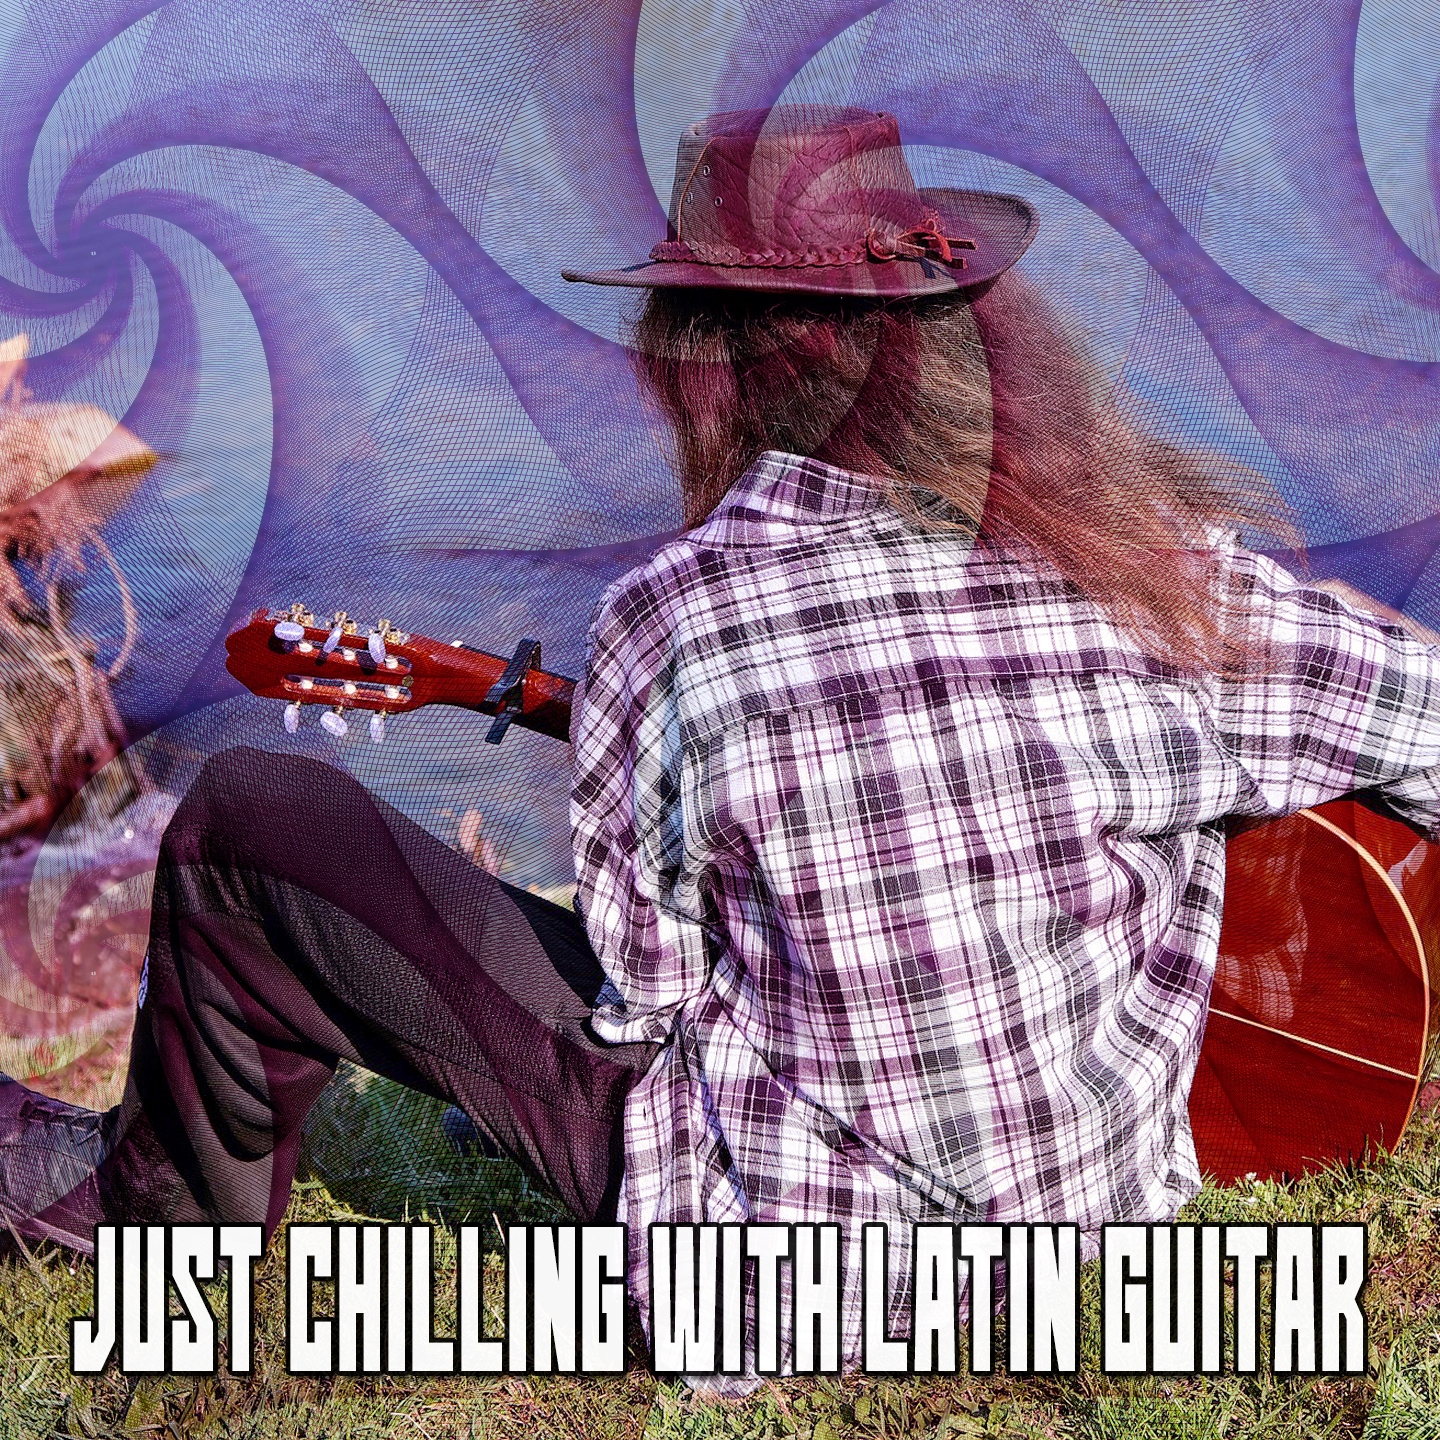 Just Chilling With Latin Guitar